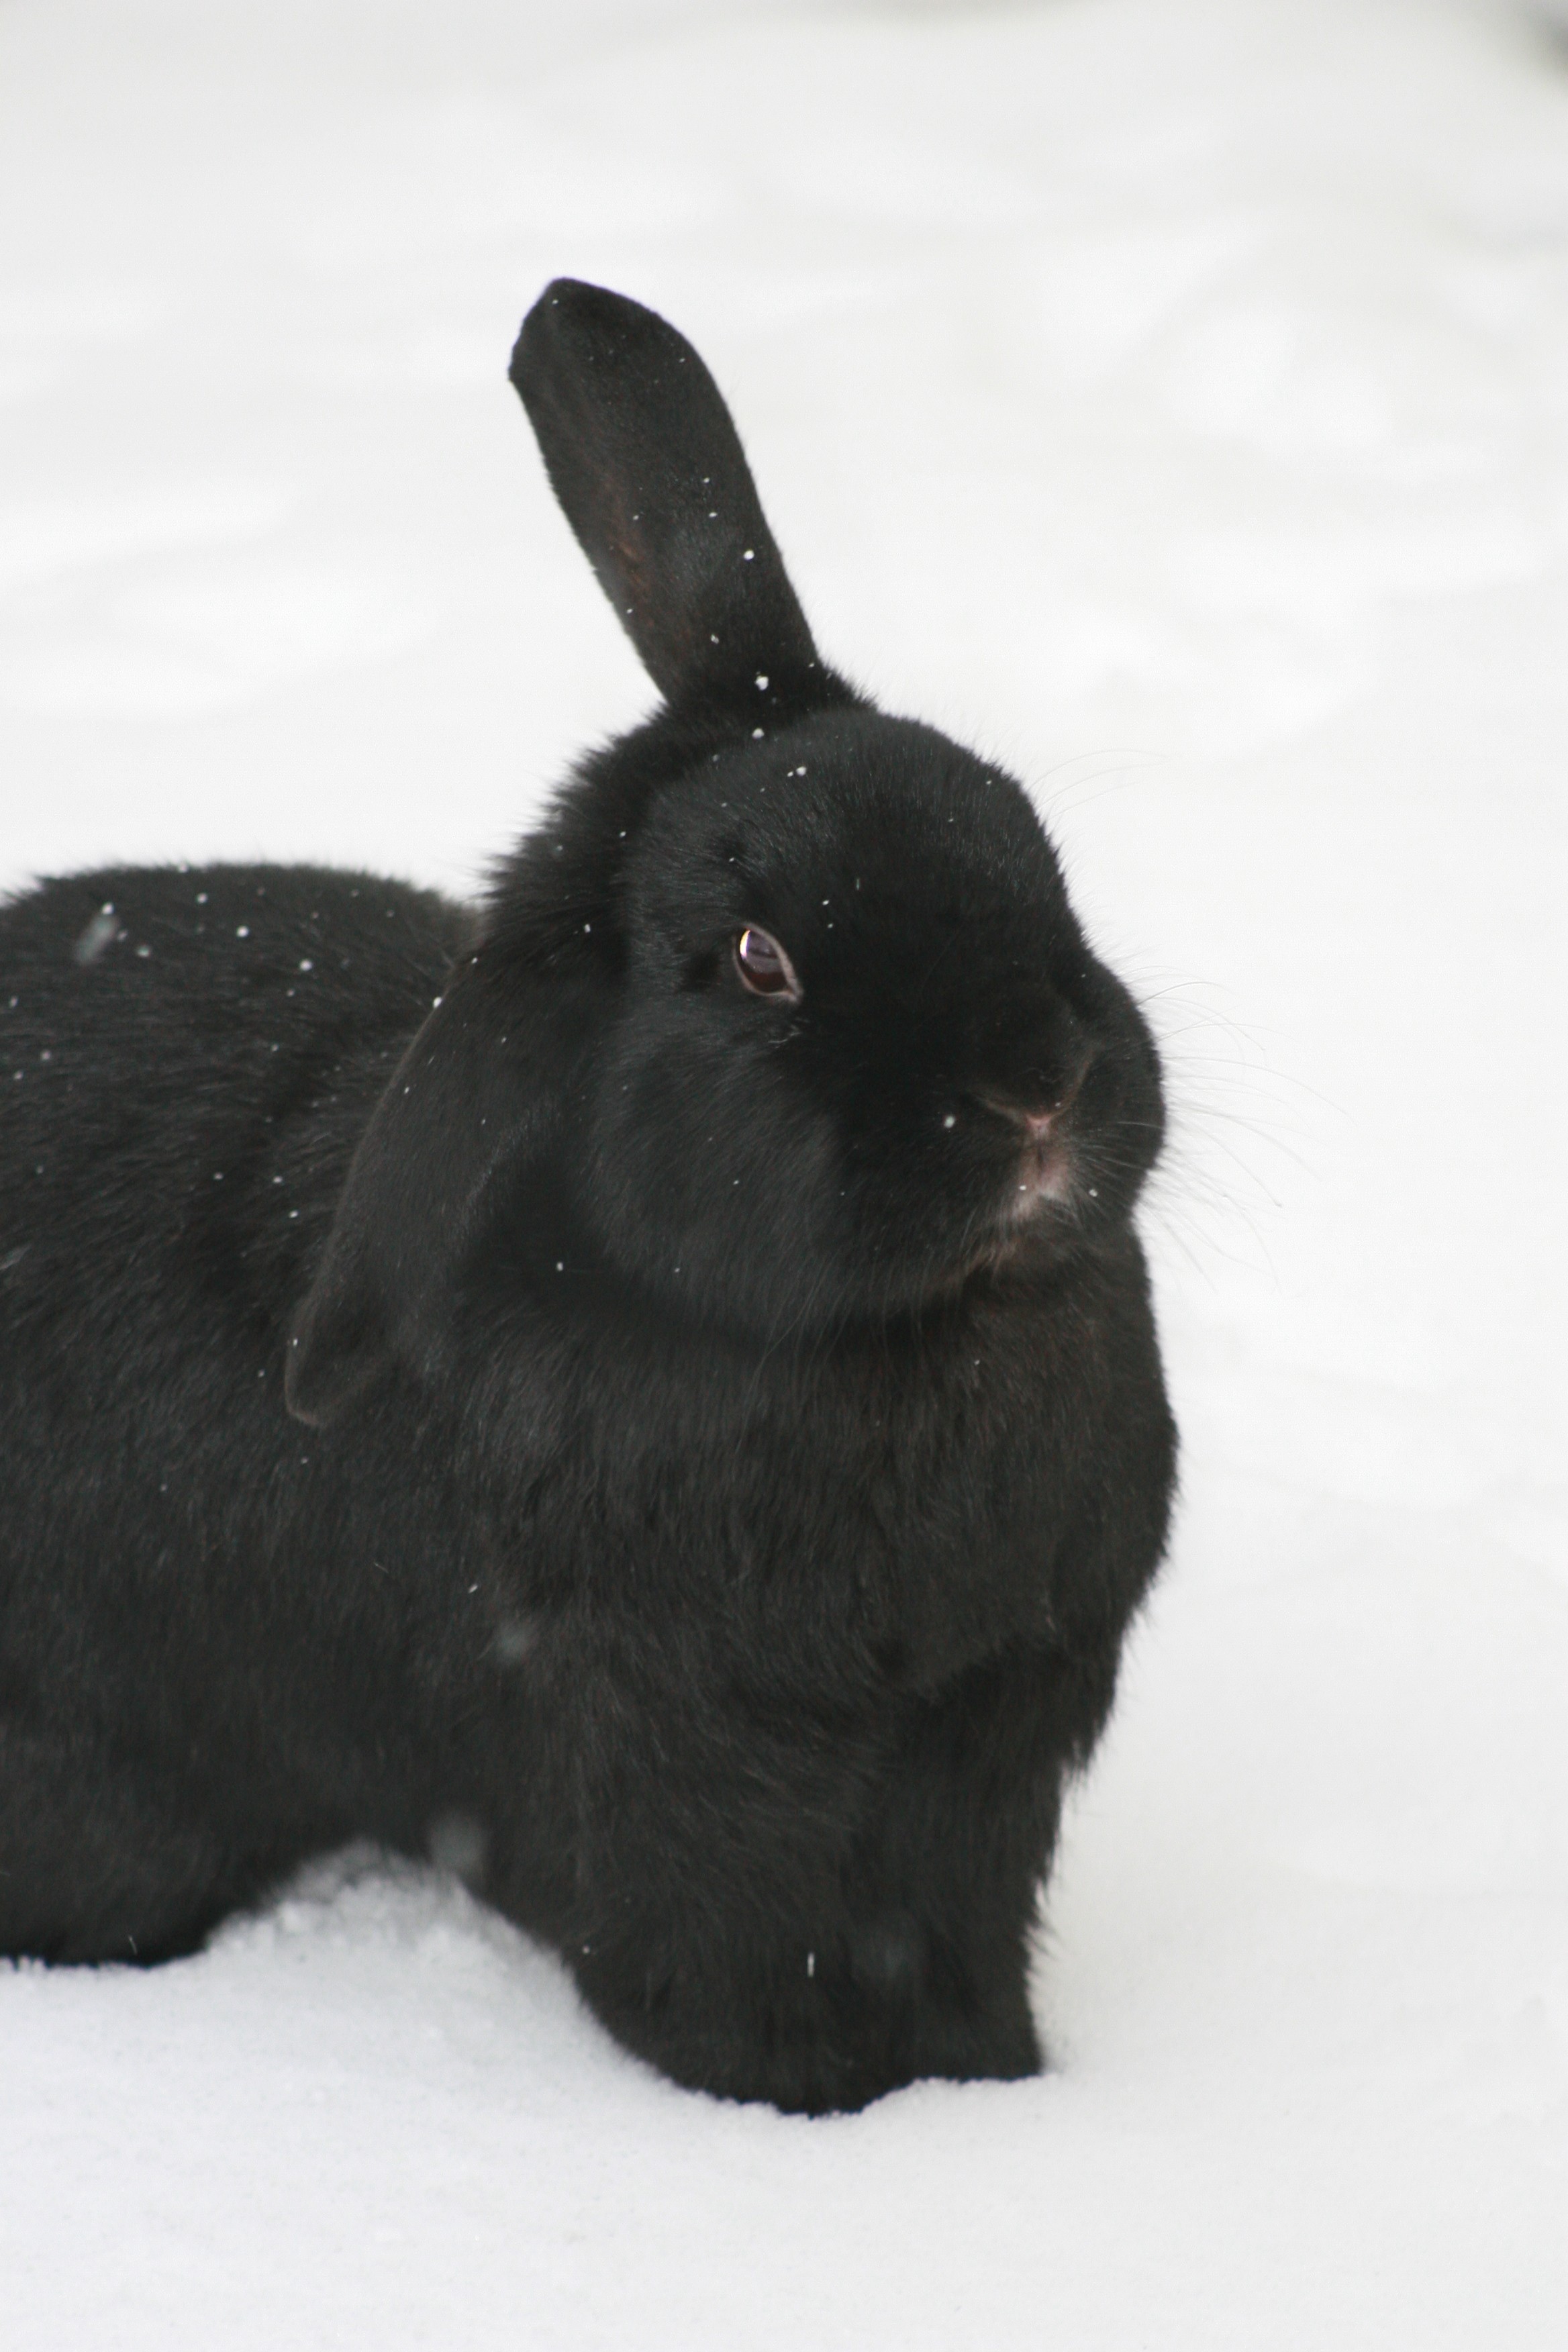 Snowflakes Show Up on This Bunny's Fur